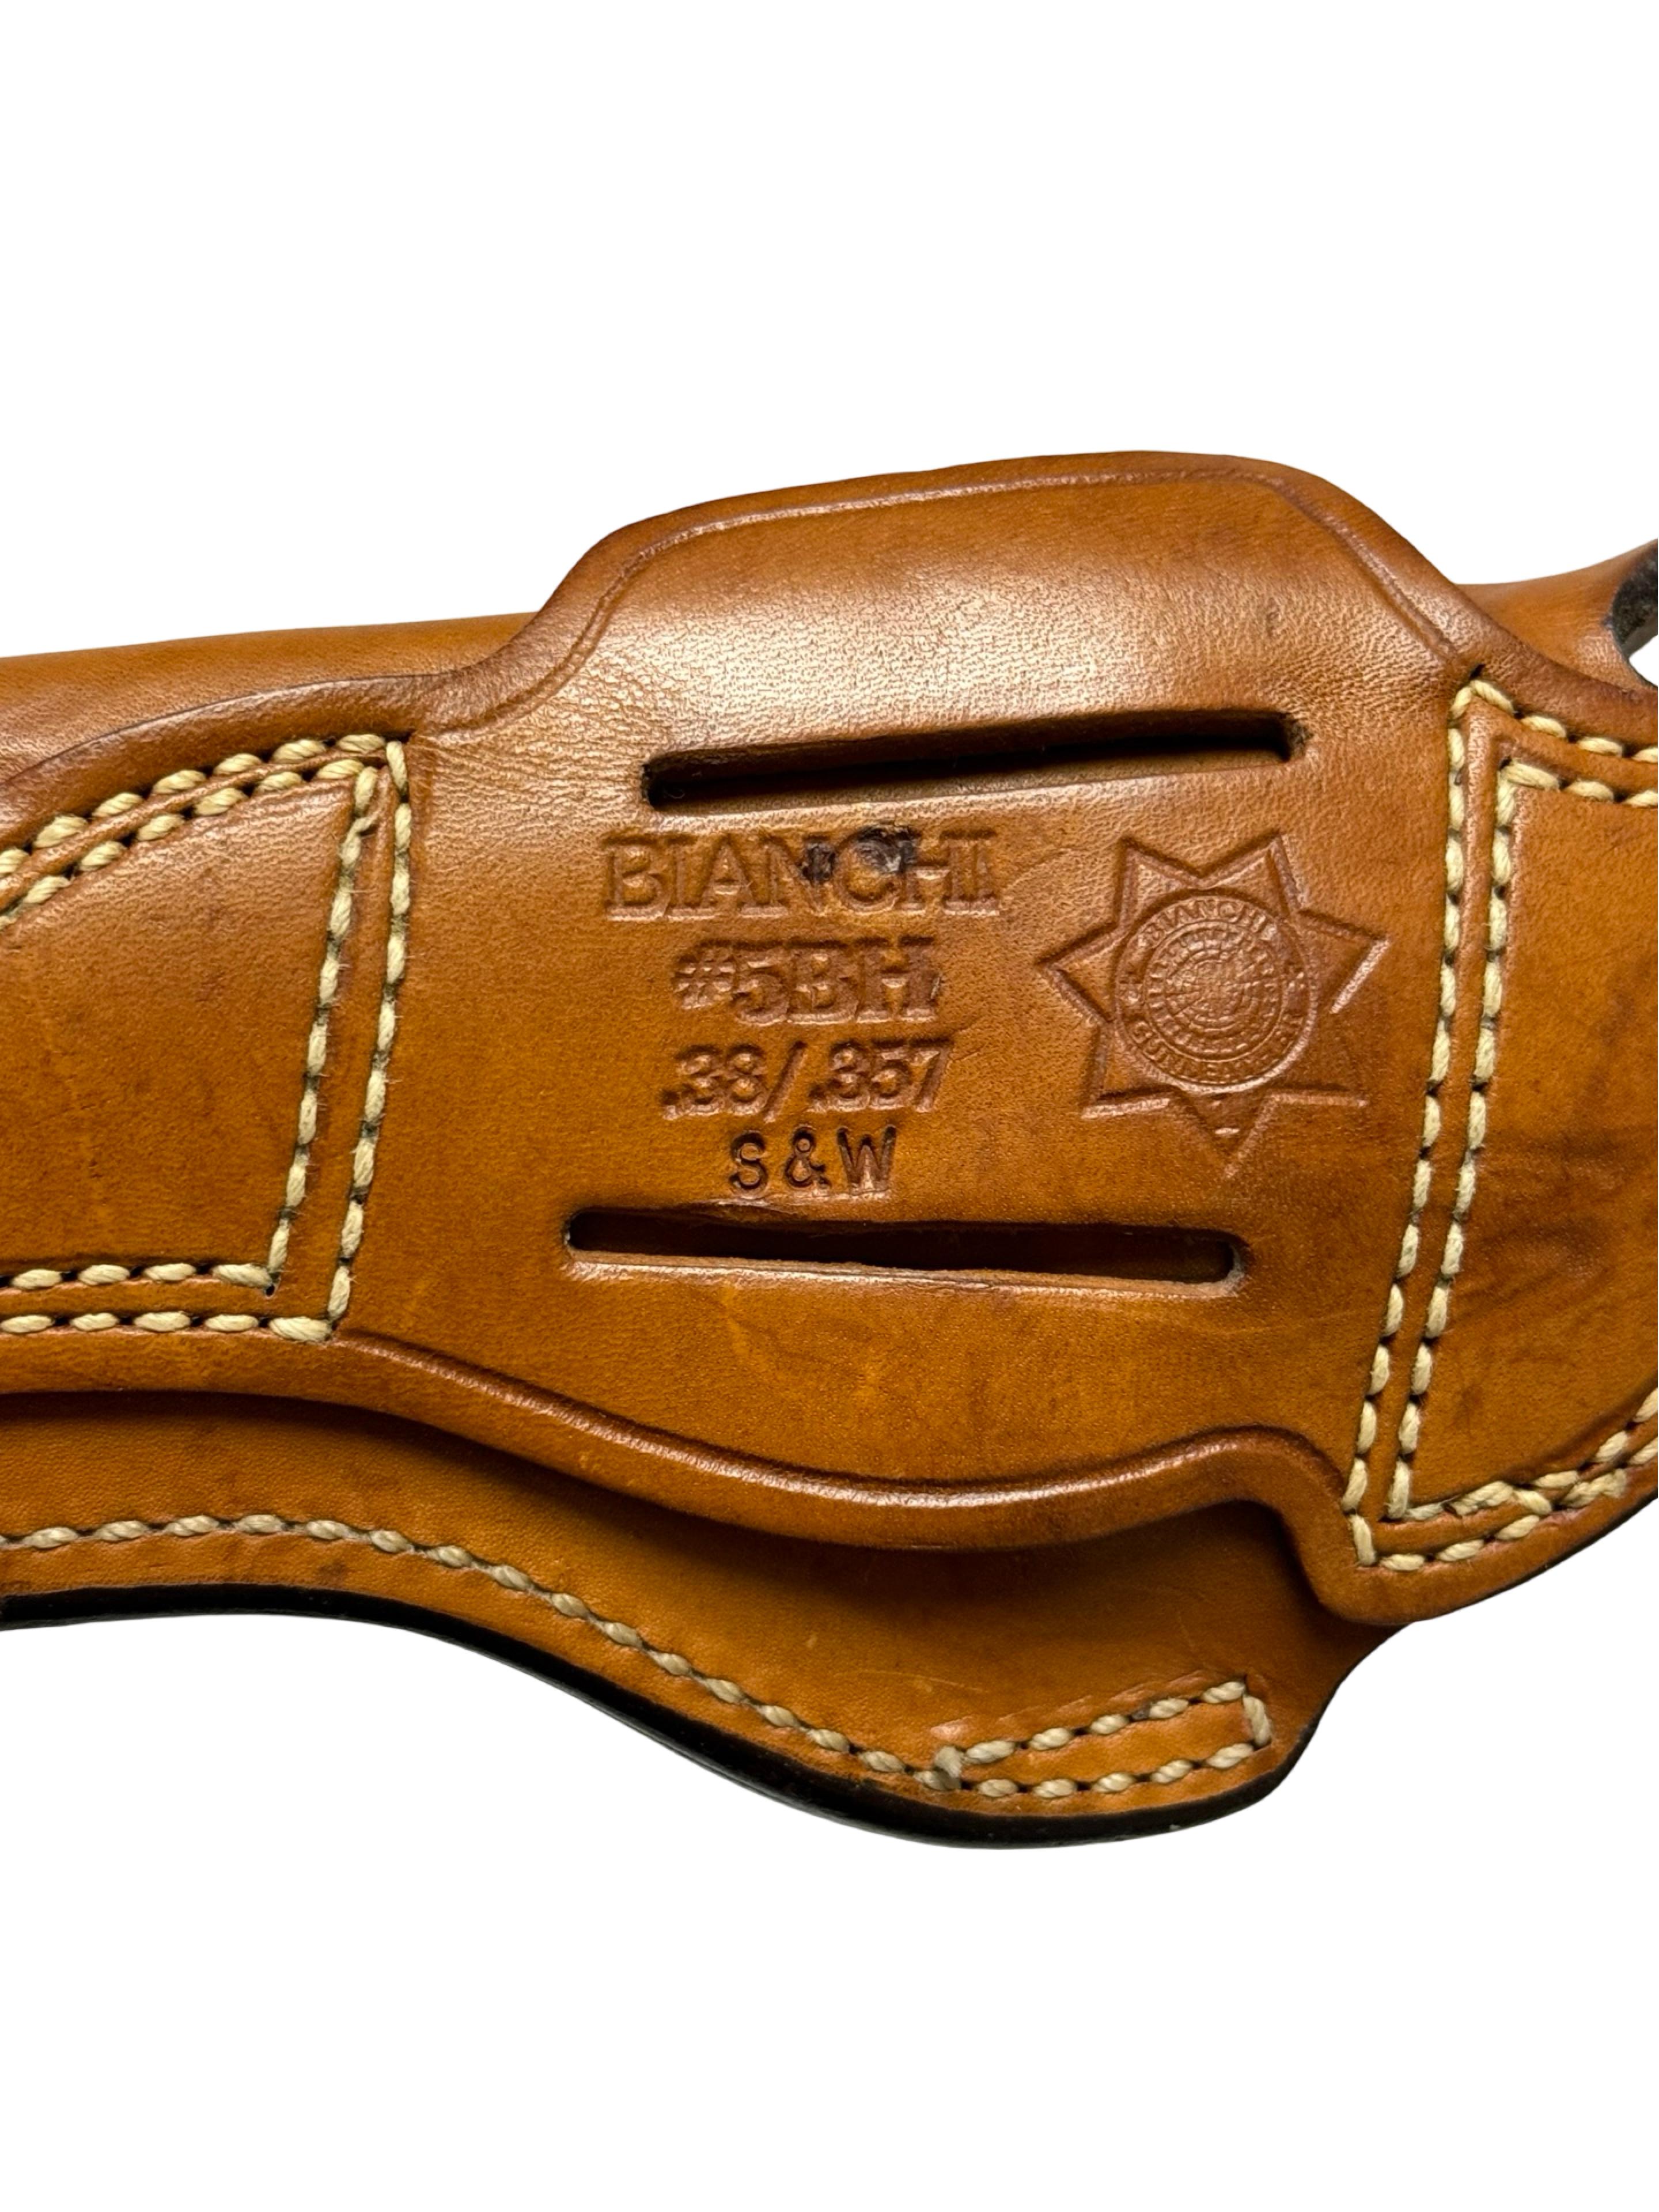 Excellent Bianchi #5BH .38/.357 S&W Leather Holster